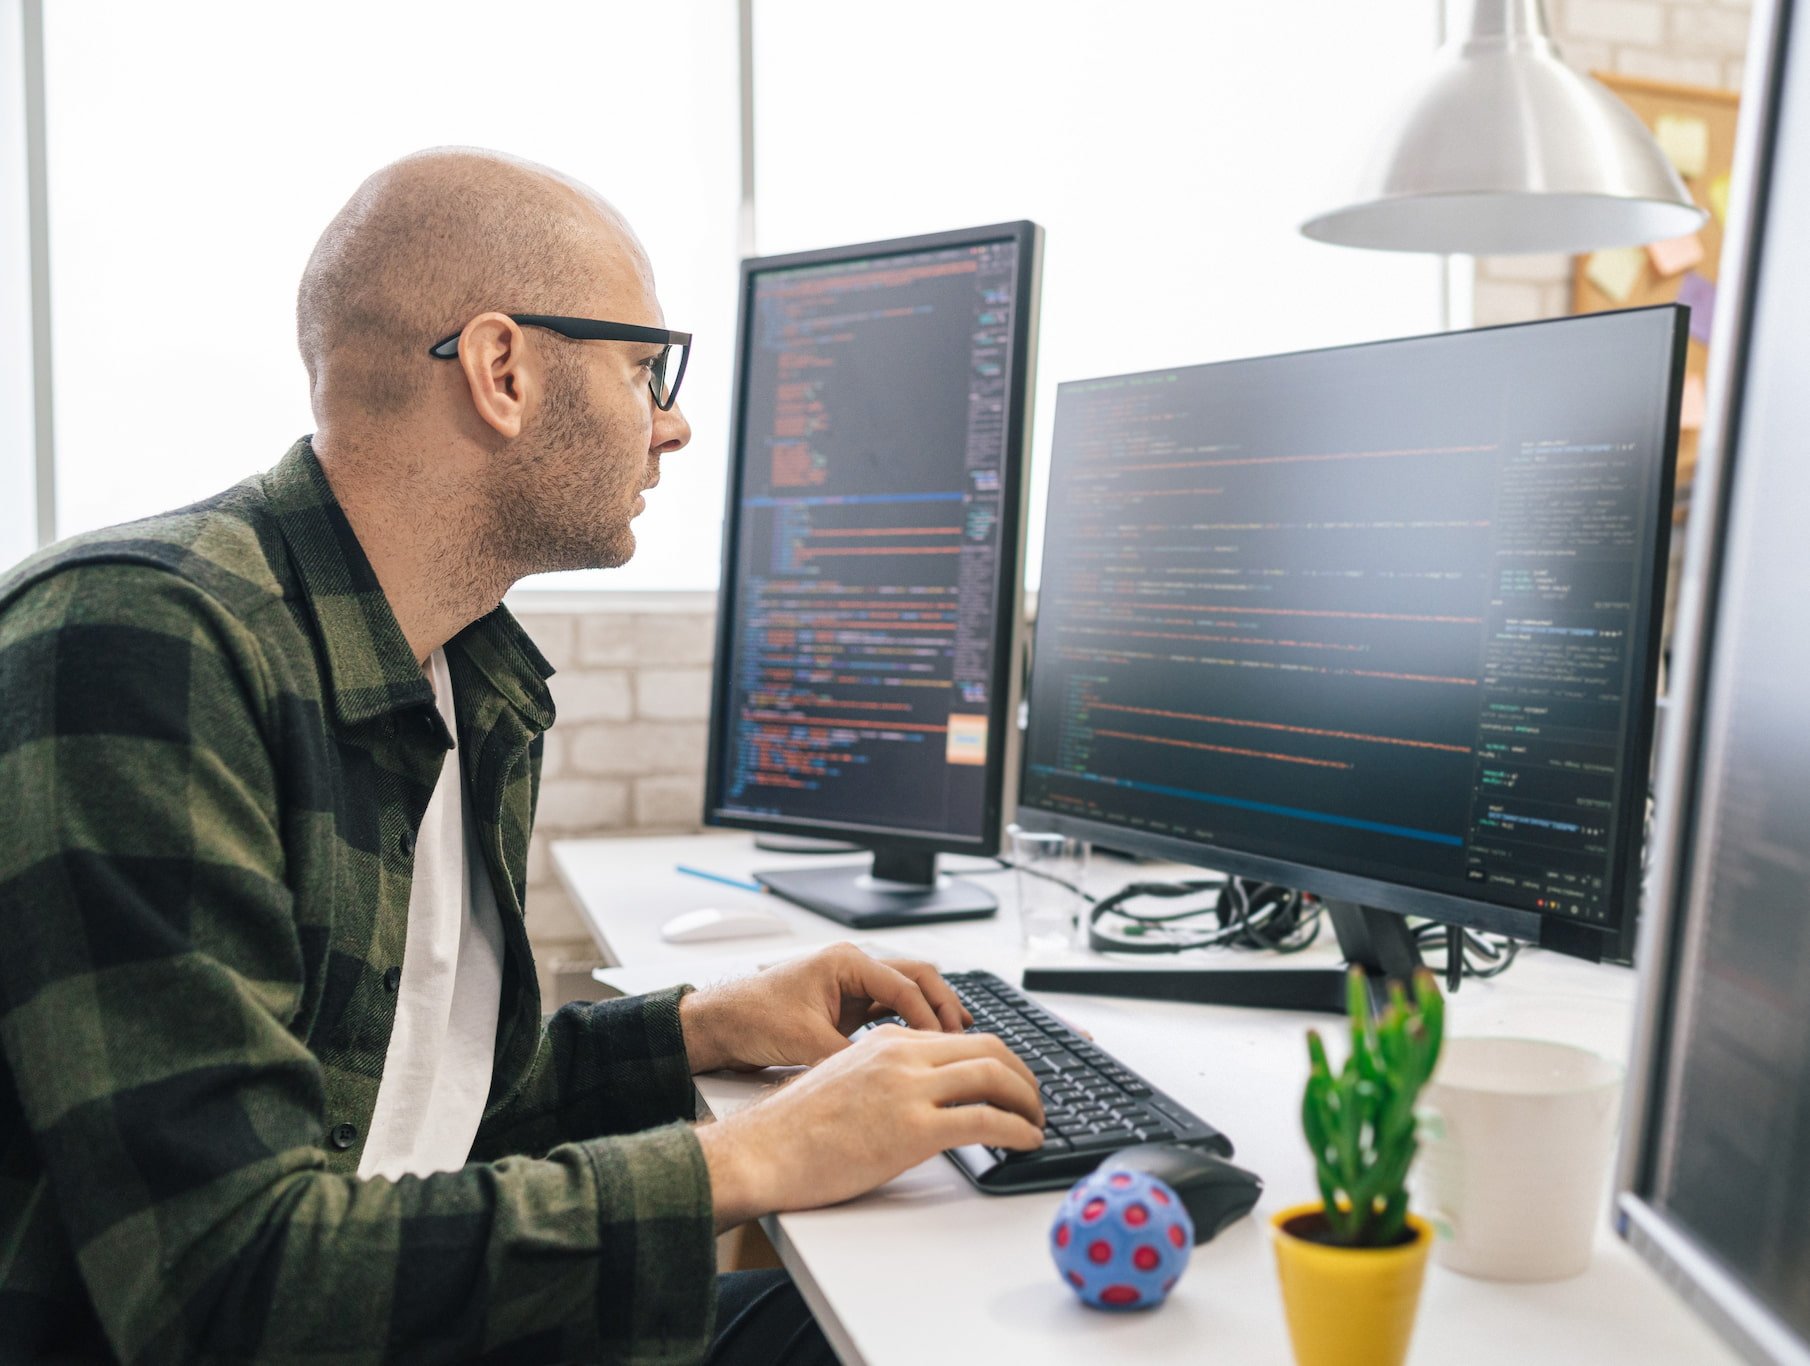 A man wearing glasses is coding on a computer.